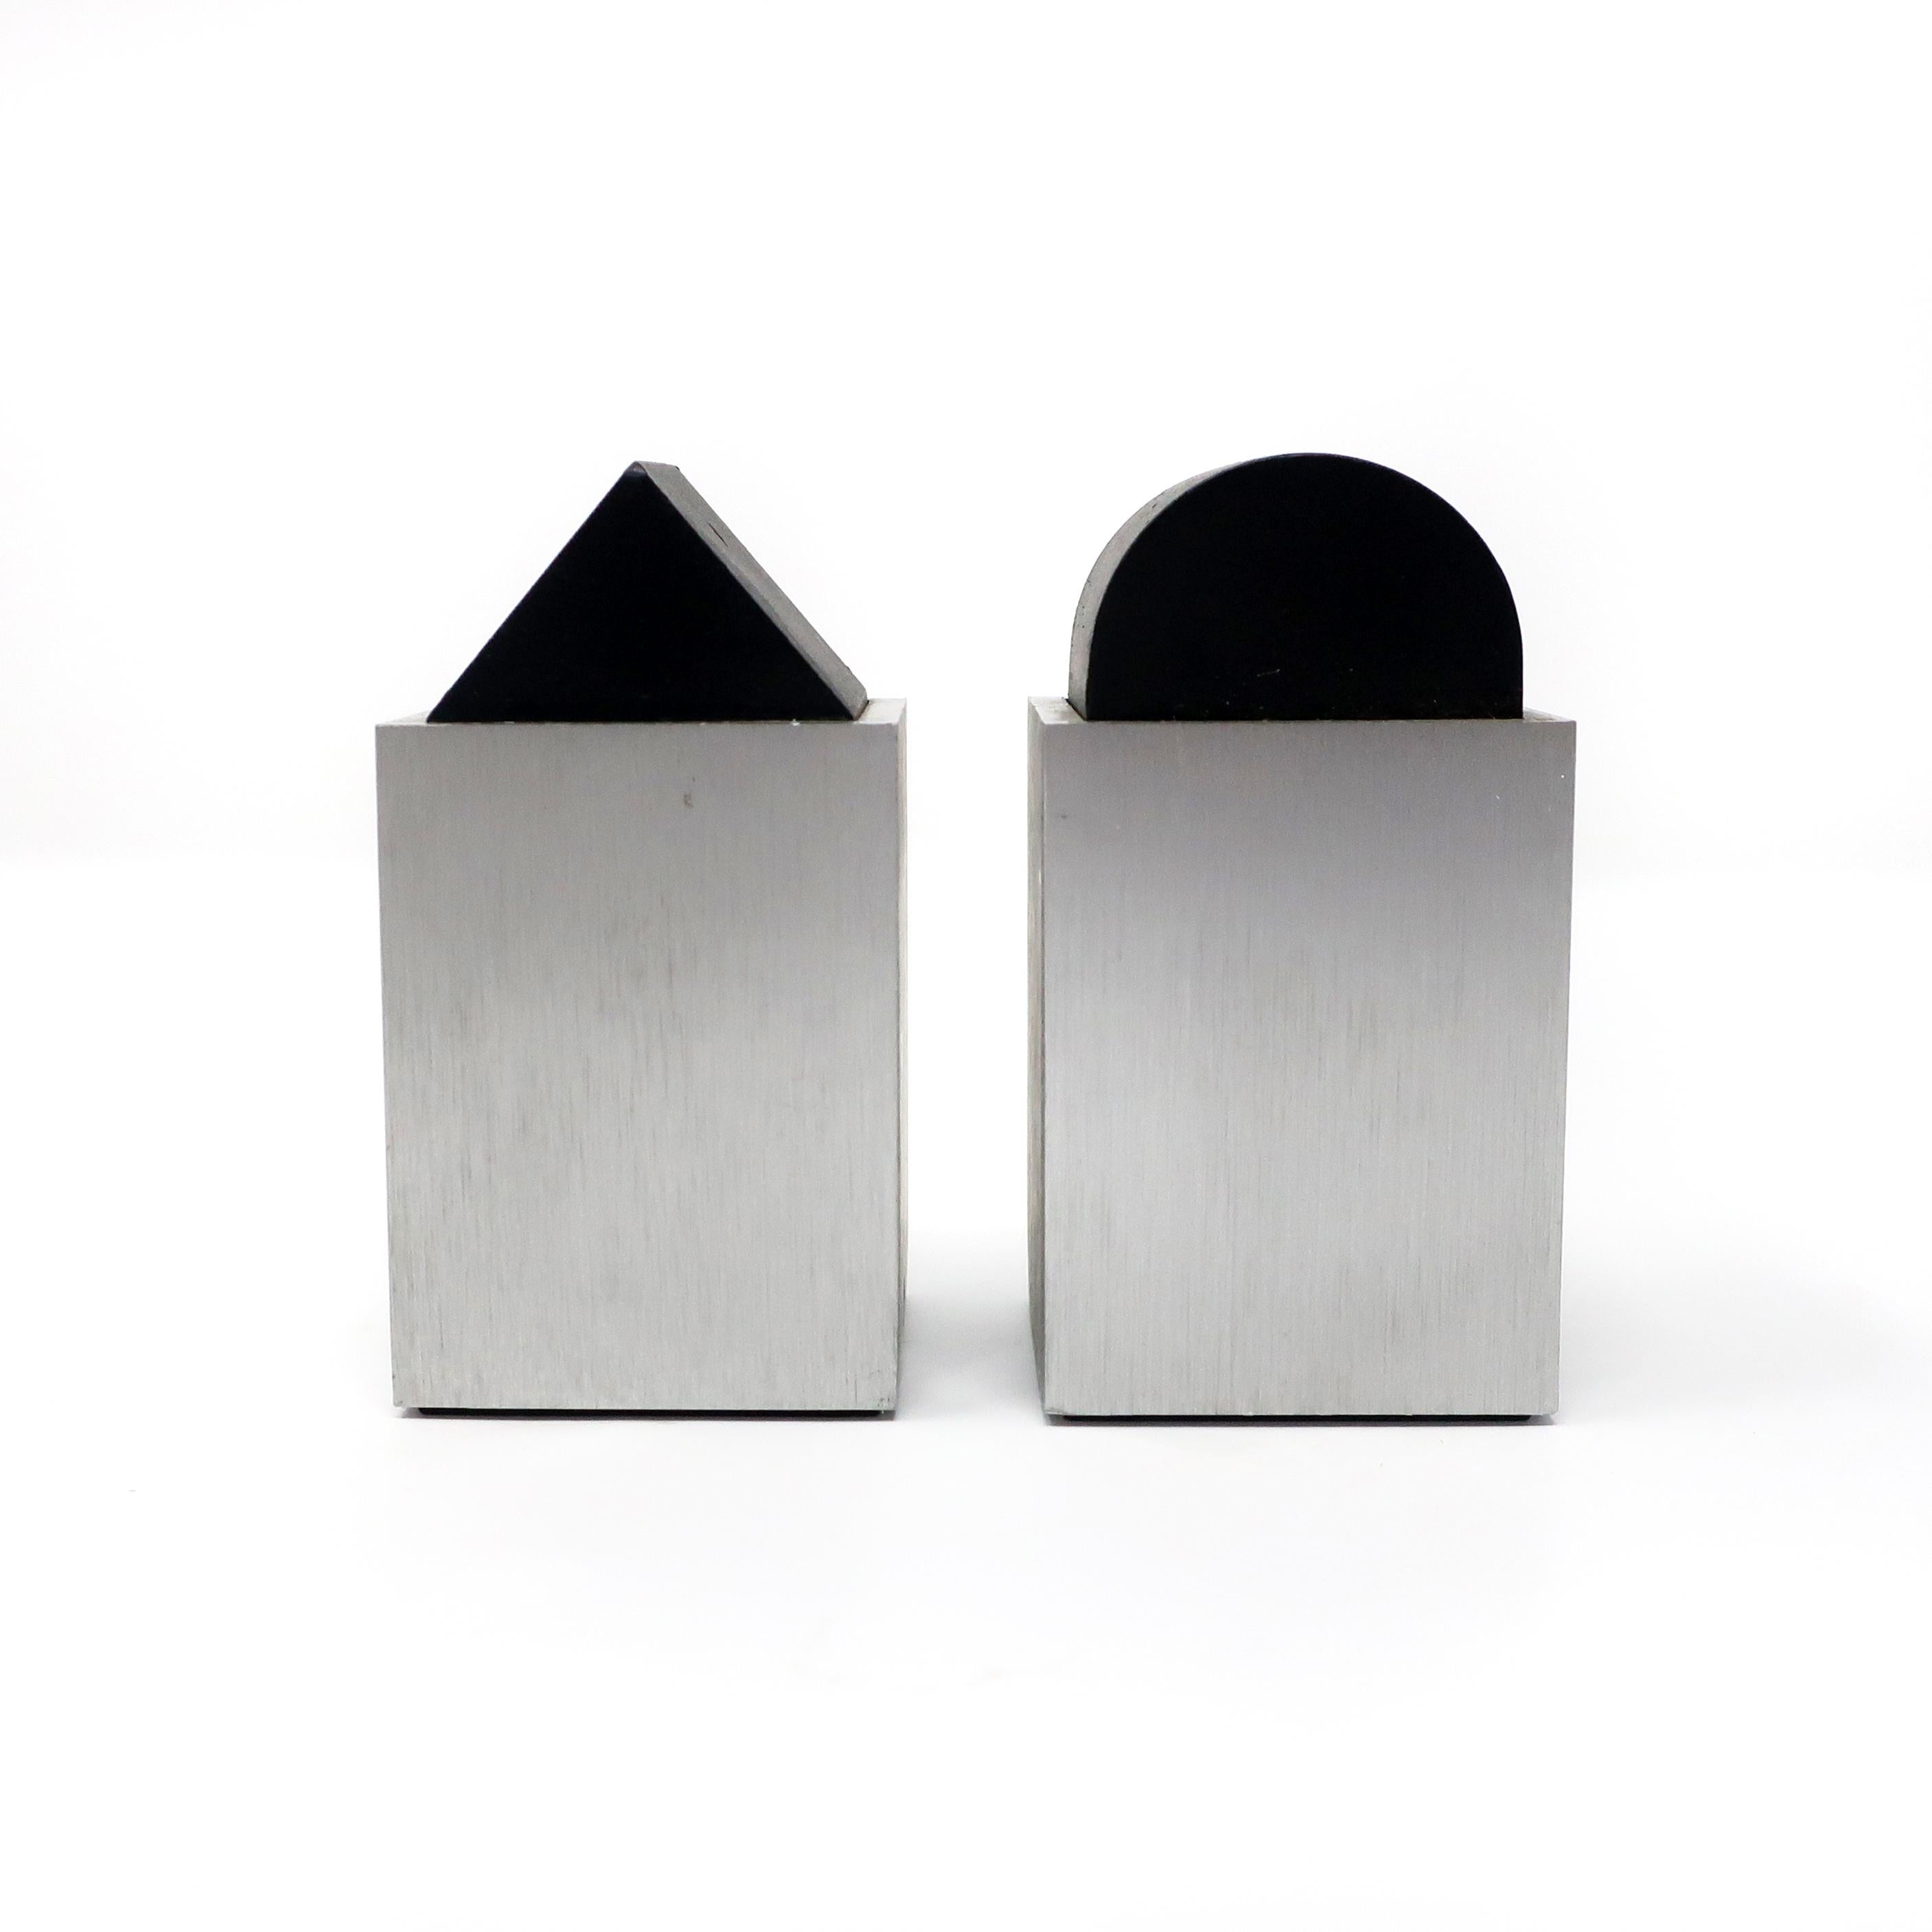 A lovely pair of Postmodern, Memphis inspired salt and pepper shakers by David Tisdale for Elika. Both are silver anodized aluminum while one has a rounded top and one has a triangle top. In excellent vintage condition with wear consistent with age